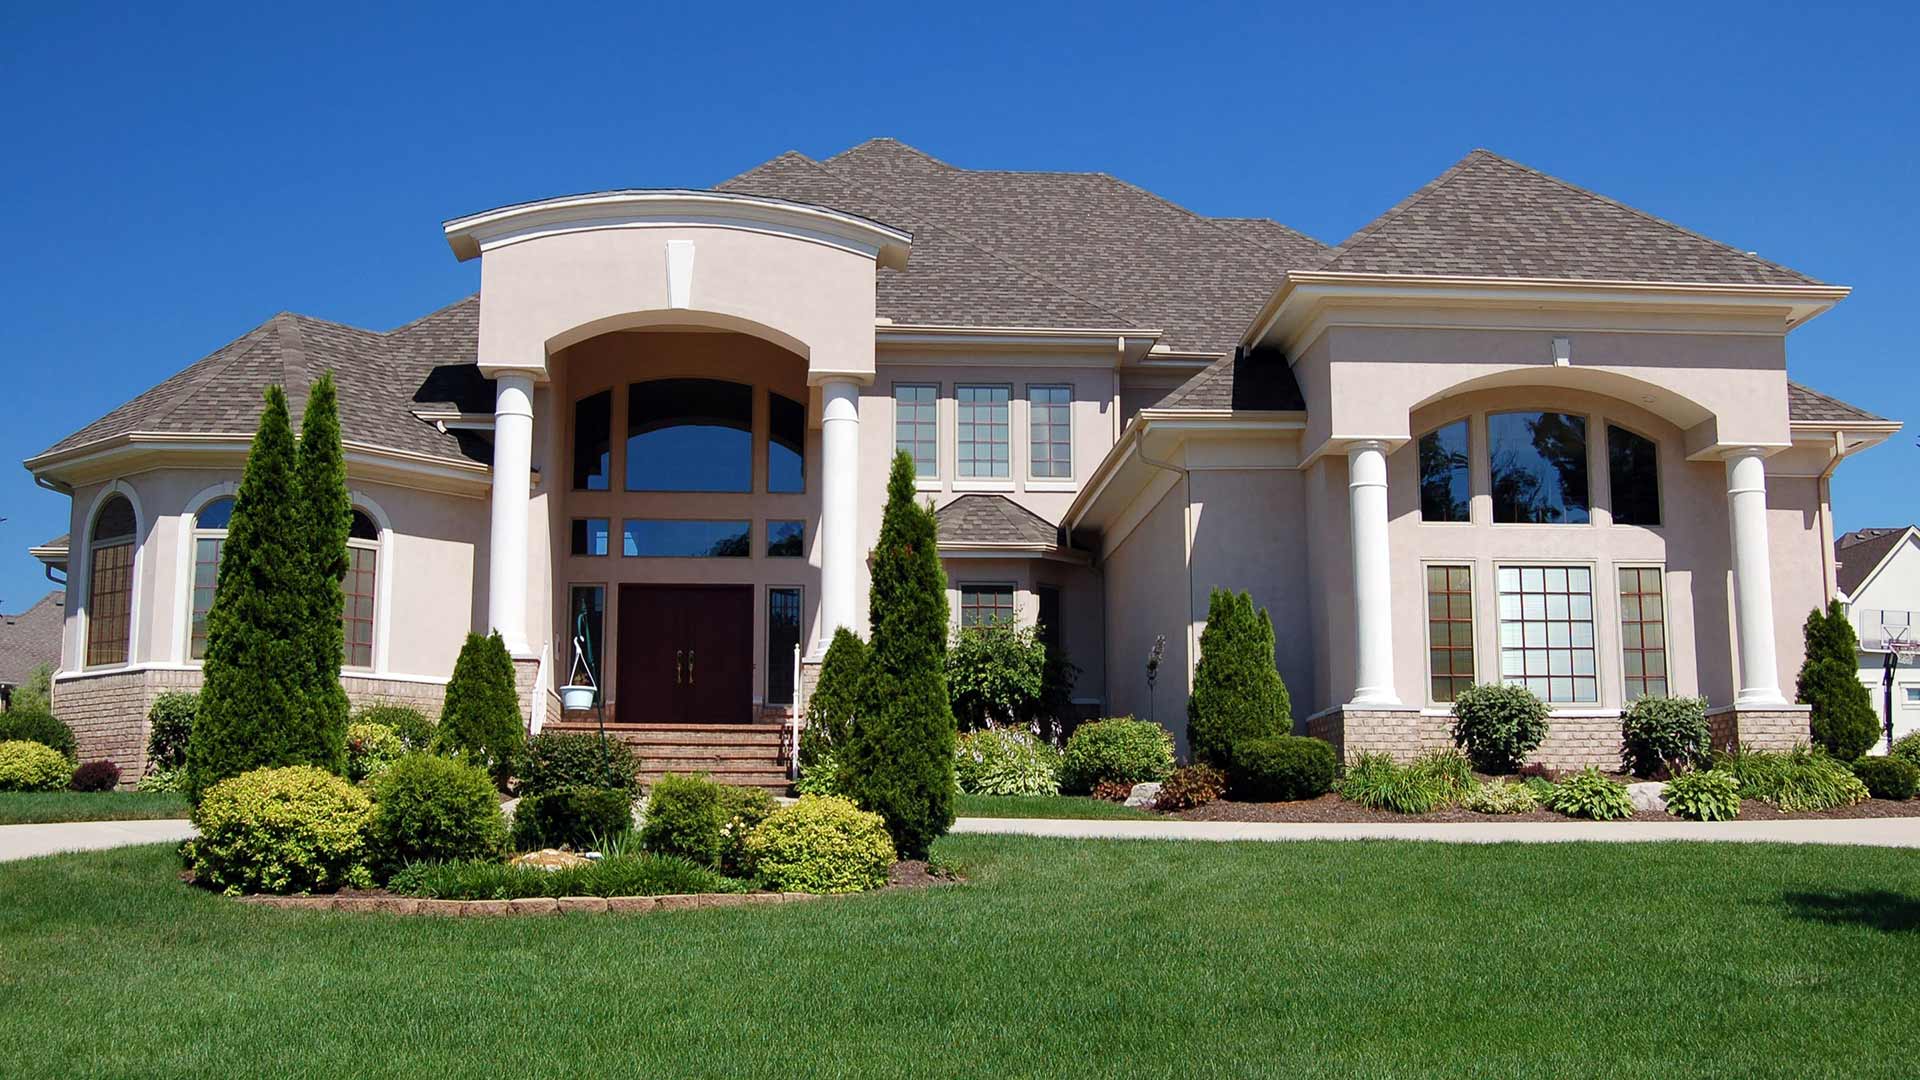 A Glen Carbon, IL home with landscaping and lawn care services.